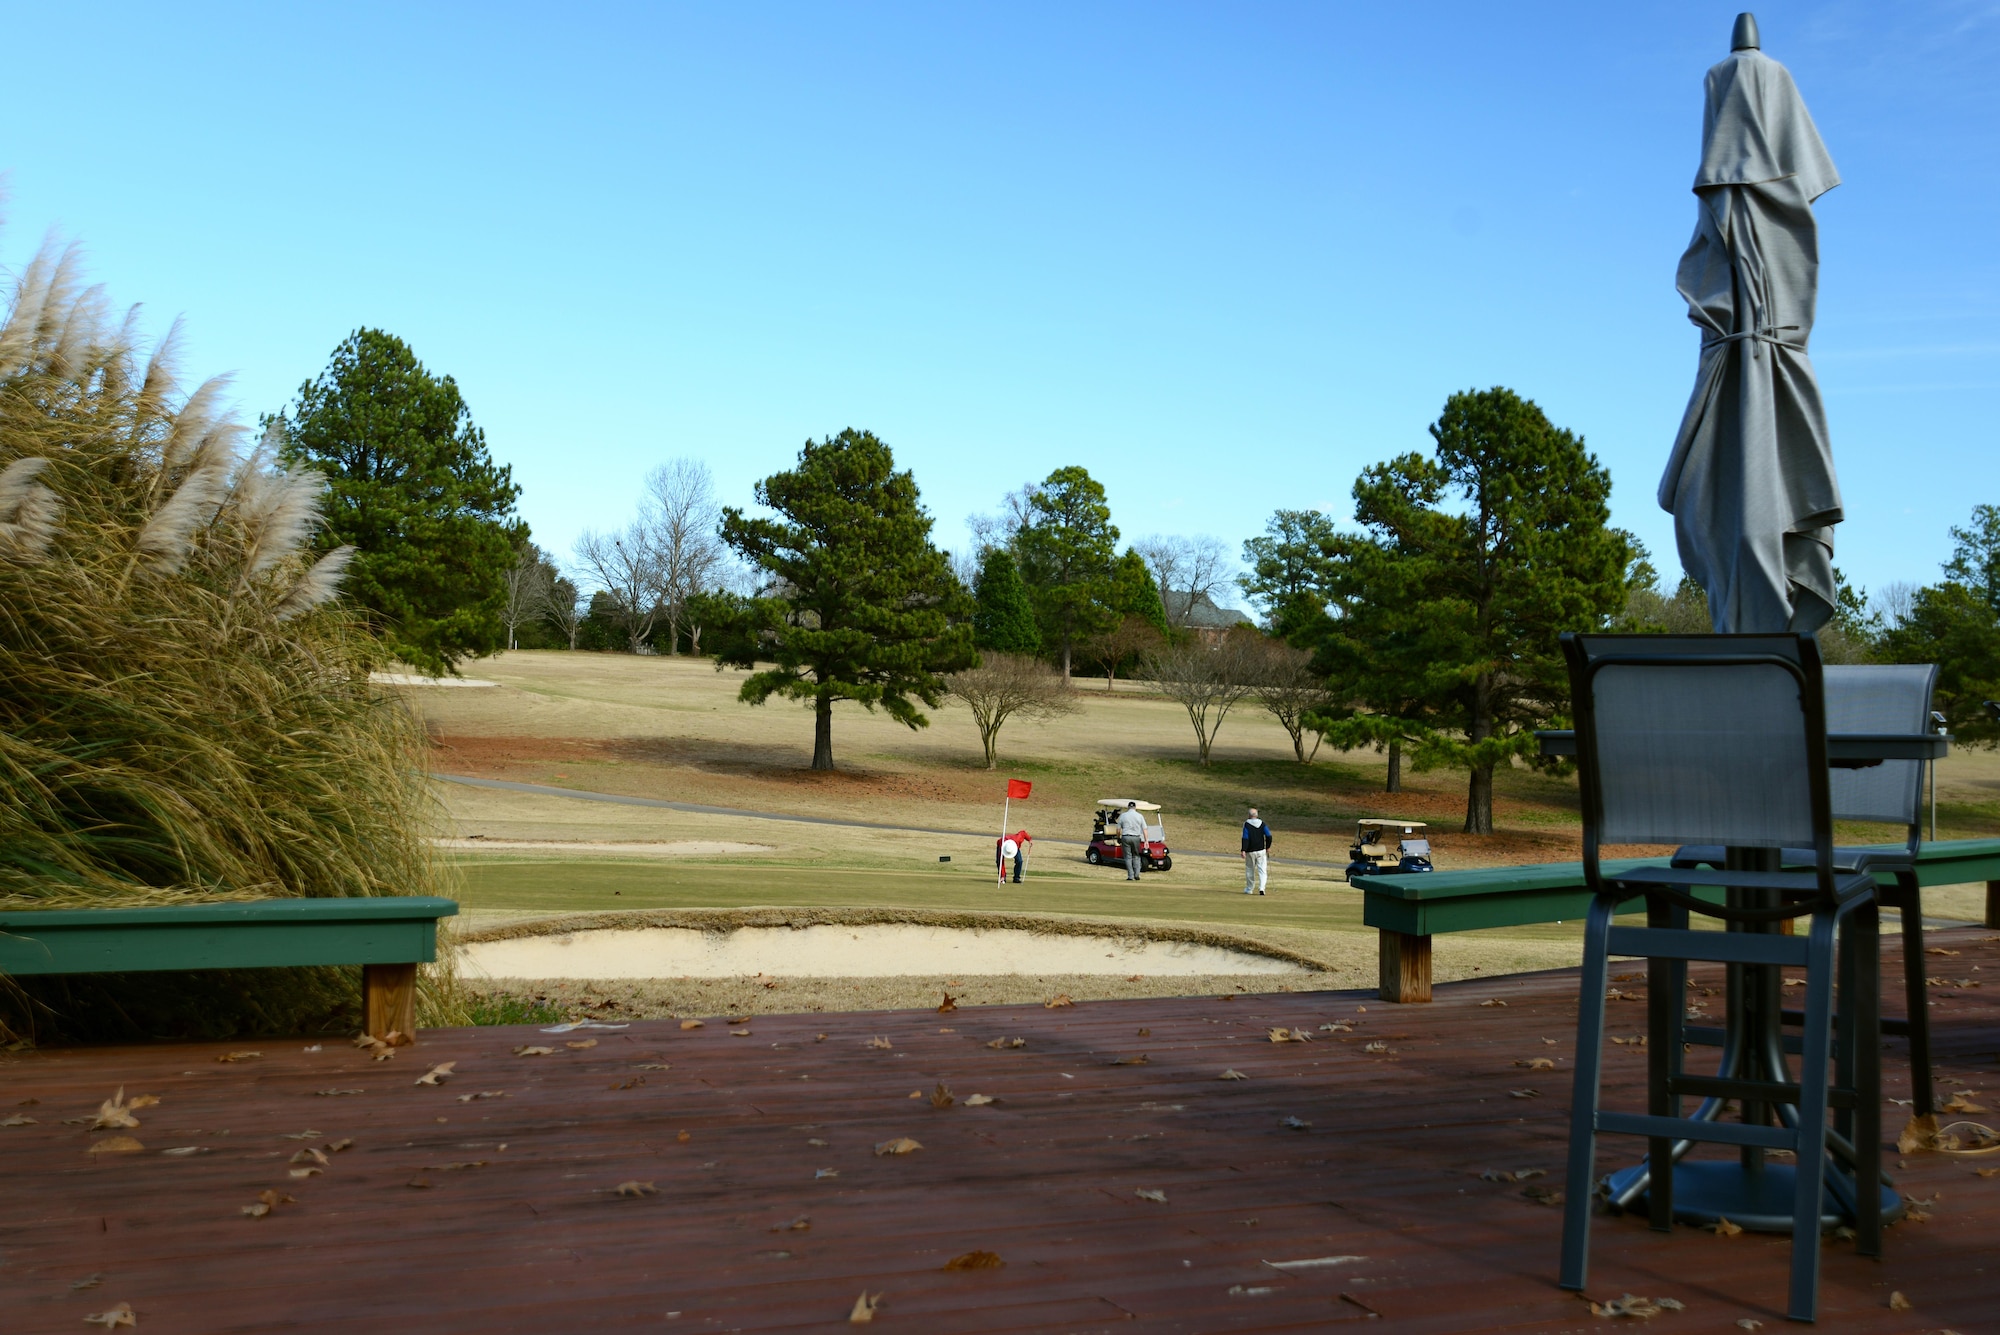 Team Shaw members play golf at the 18th hole near the patio at the Carolina Lakes Golf Course at Shaw Air Force Base, S.C., Jan. 26, 2017. New outdoor furniture was added to the patio of the Stephen M. Creech Golf Complex as part of the golf course’s renovations, which were completed Jan. 15. (U.S. Air Force photo by Airman 1st Class Kathryn R.C. Reaves)